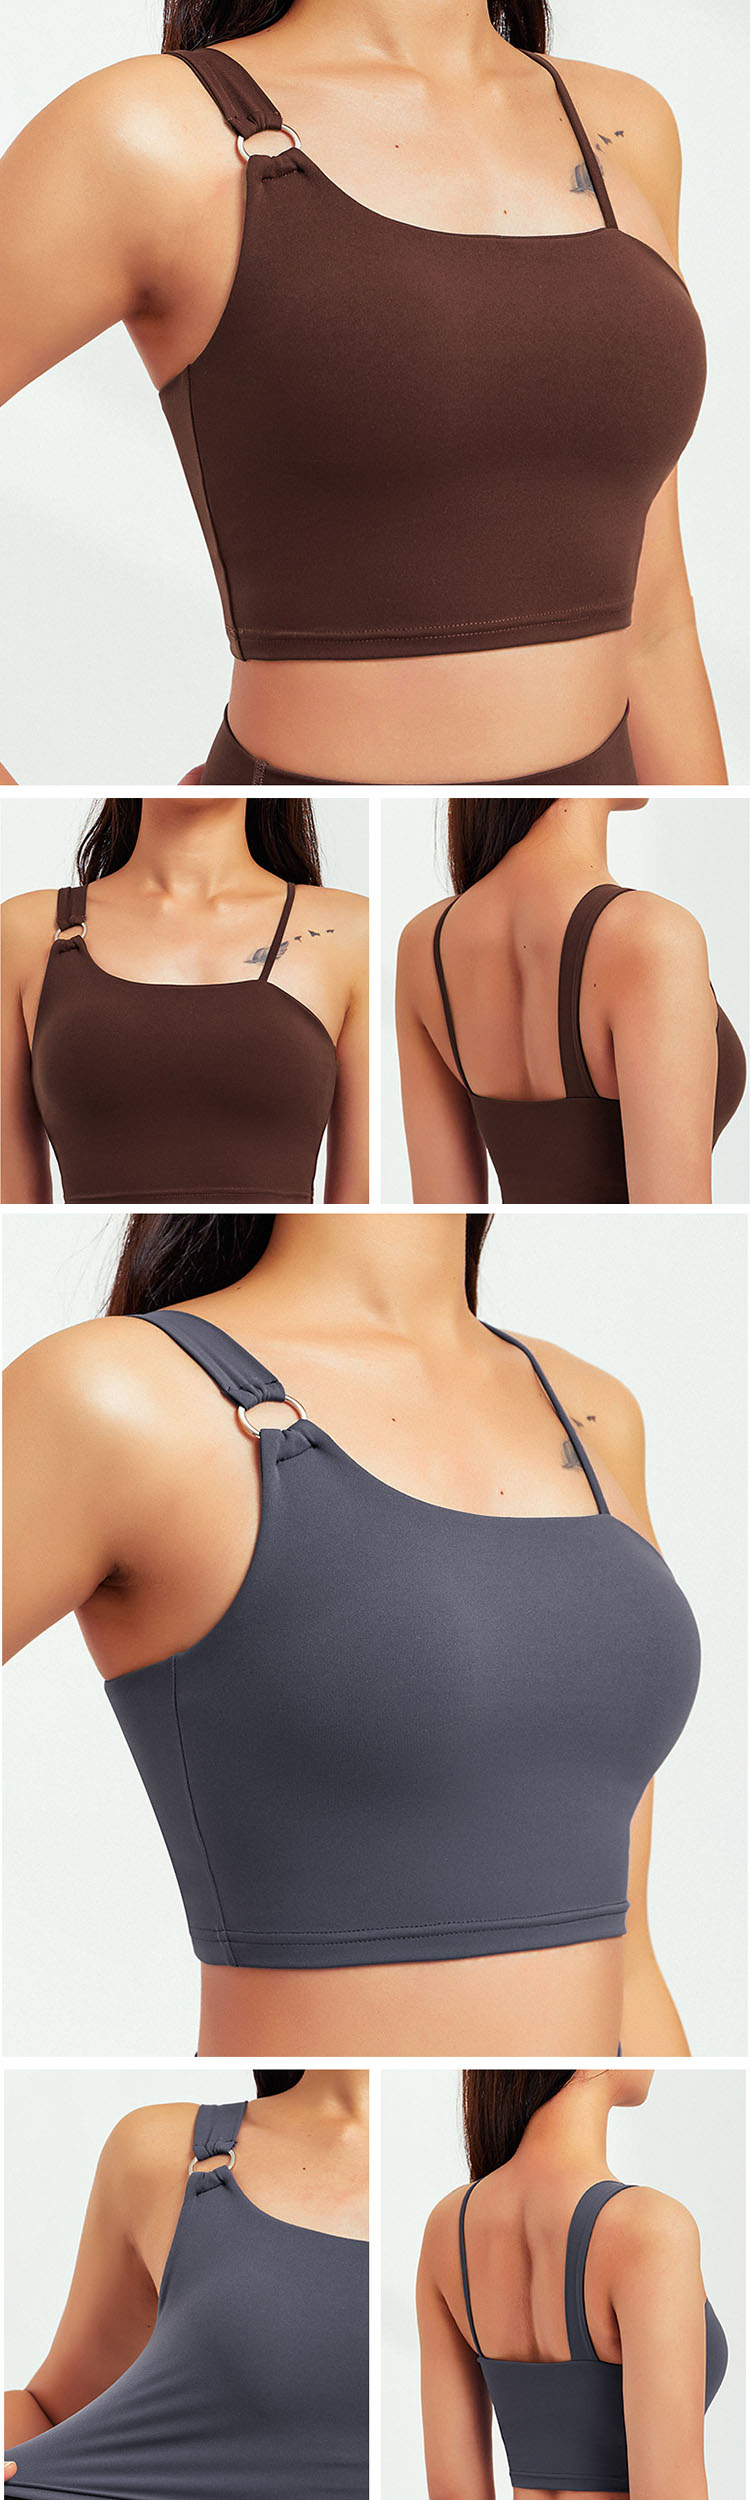 Use high-elastic fabric, perfect shape, fit the body.